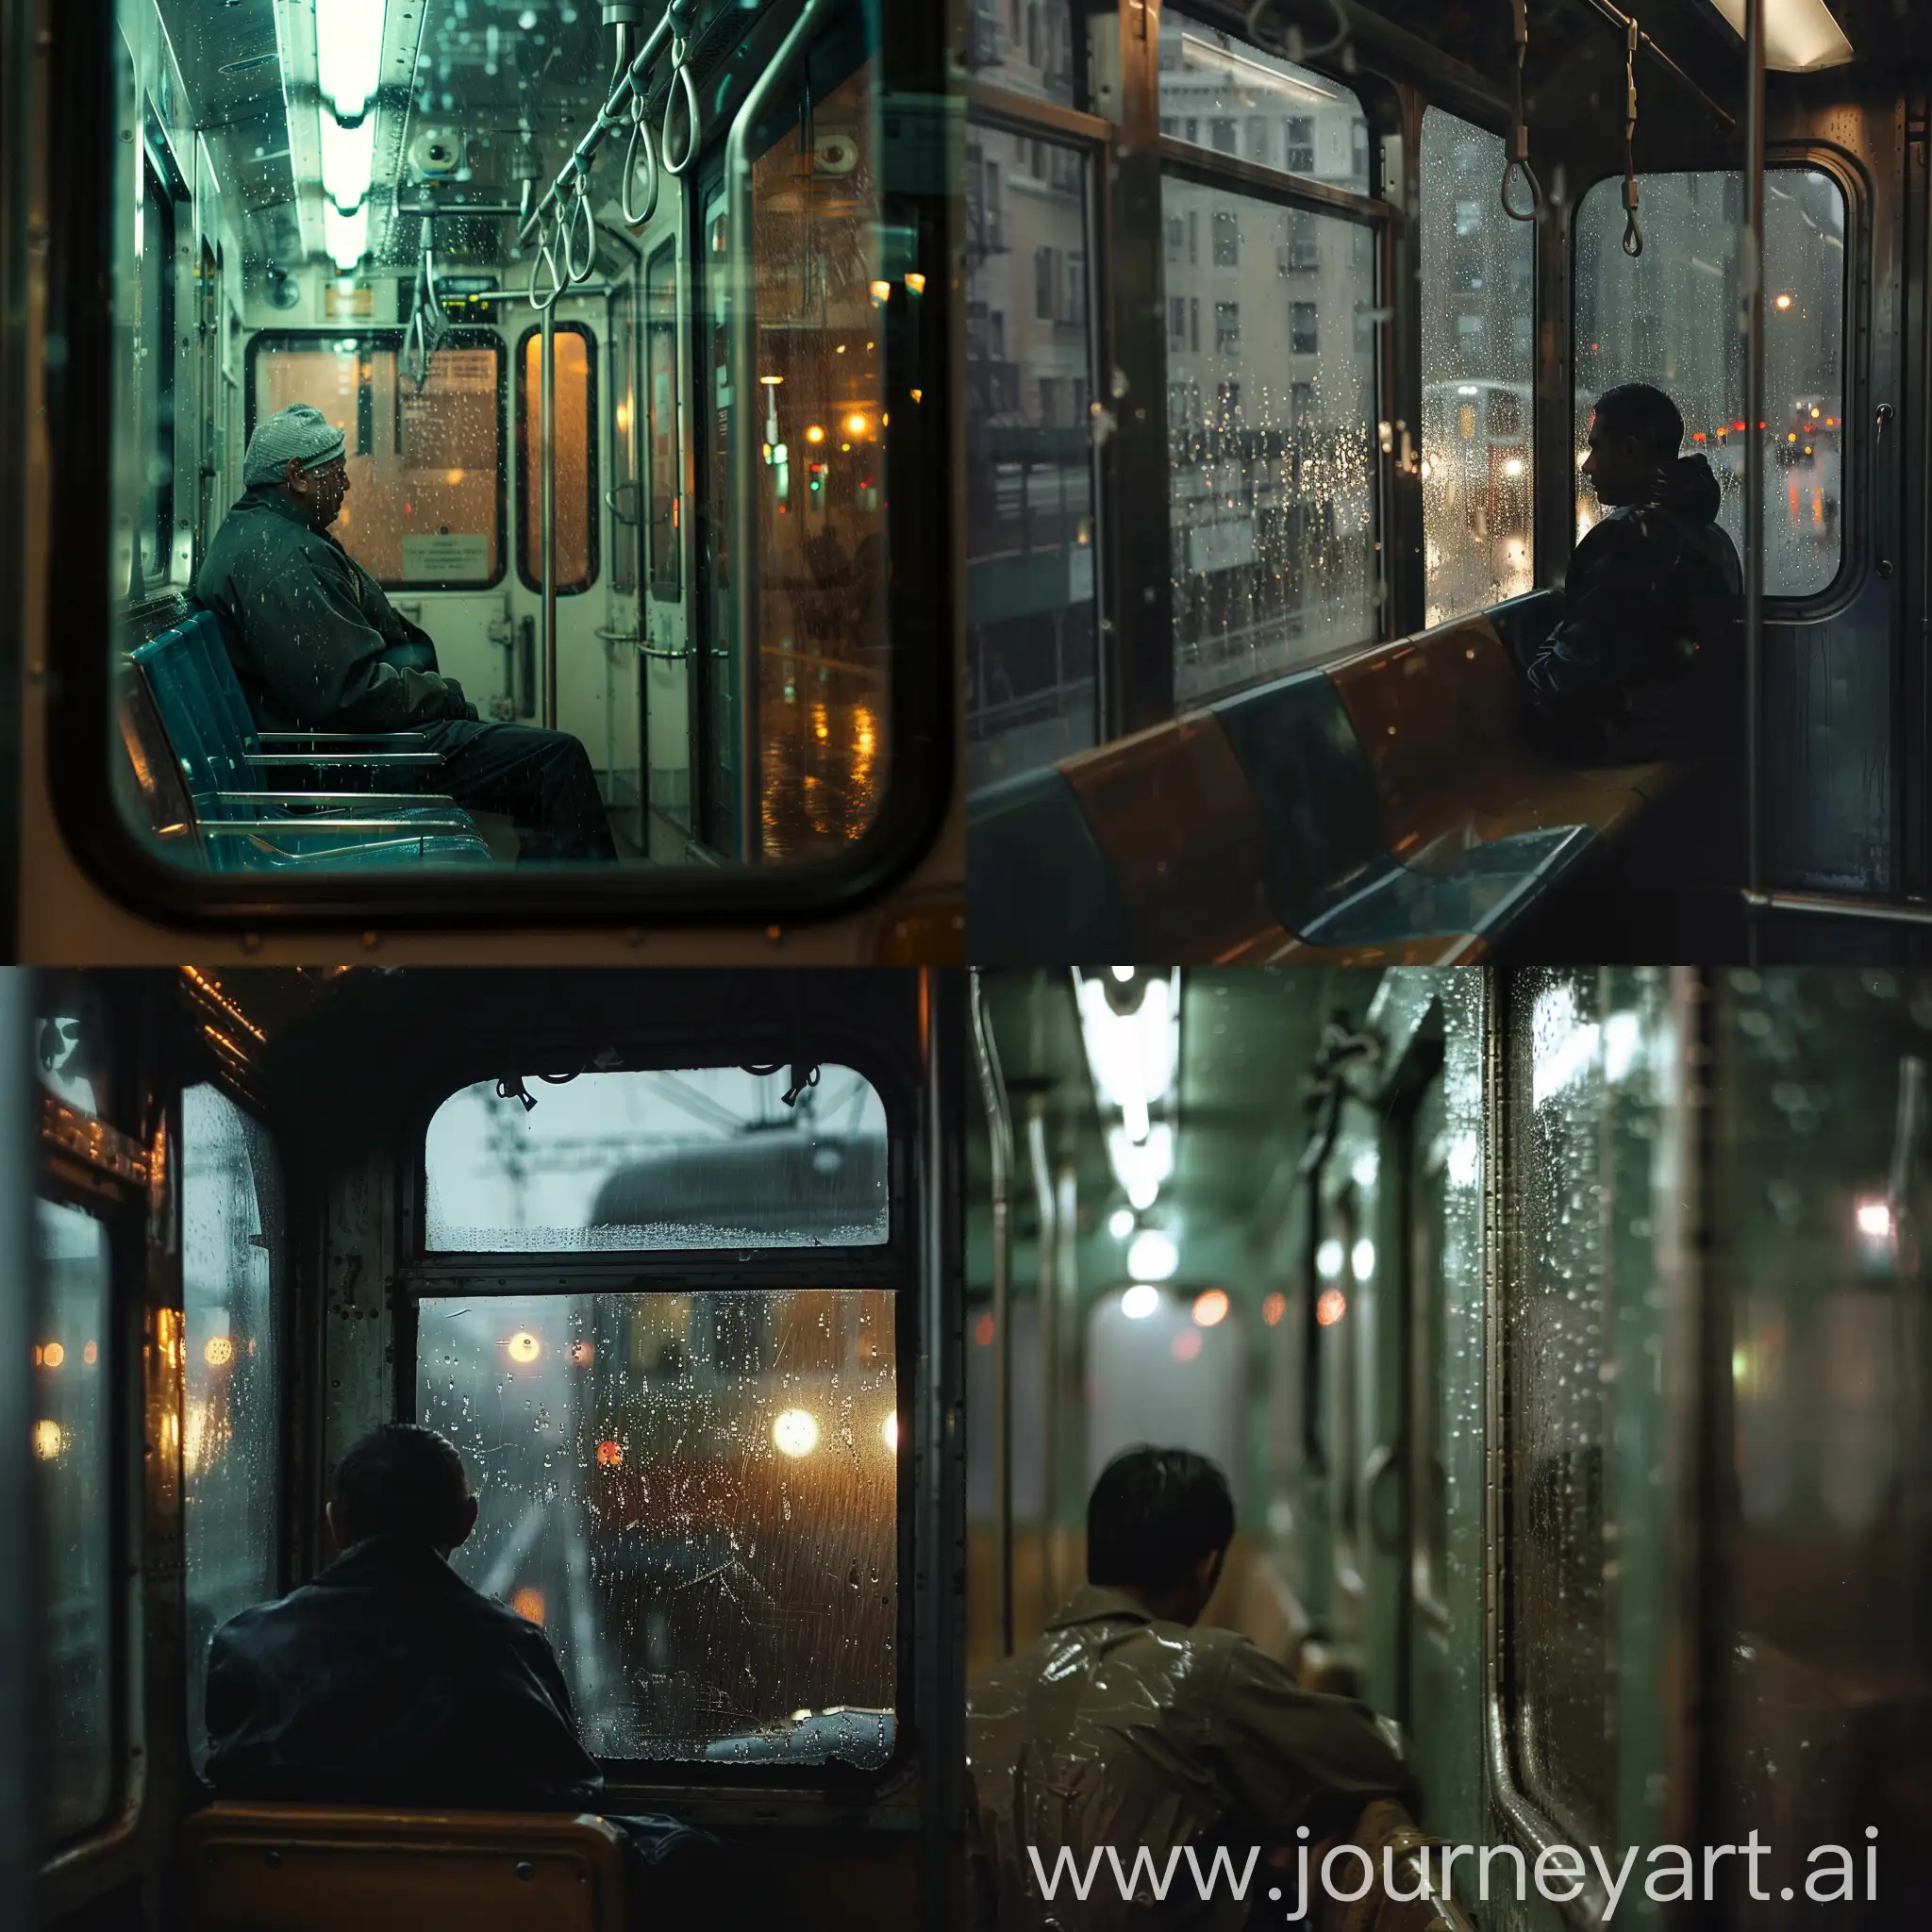 a man sitting in a train while it is raining